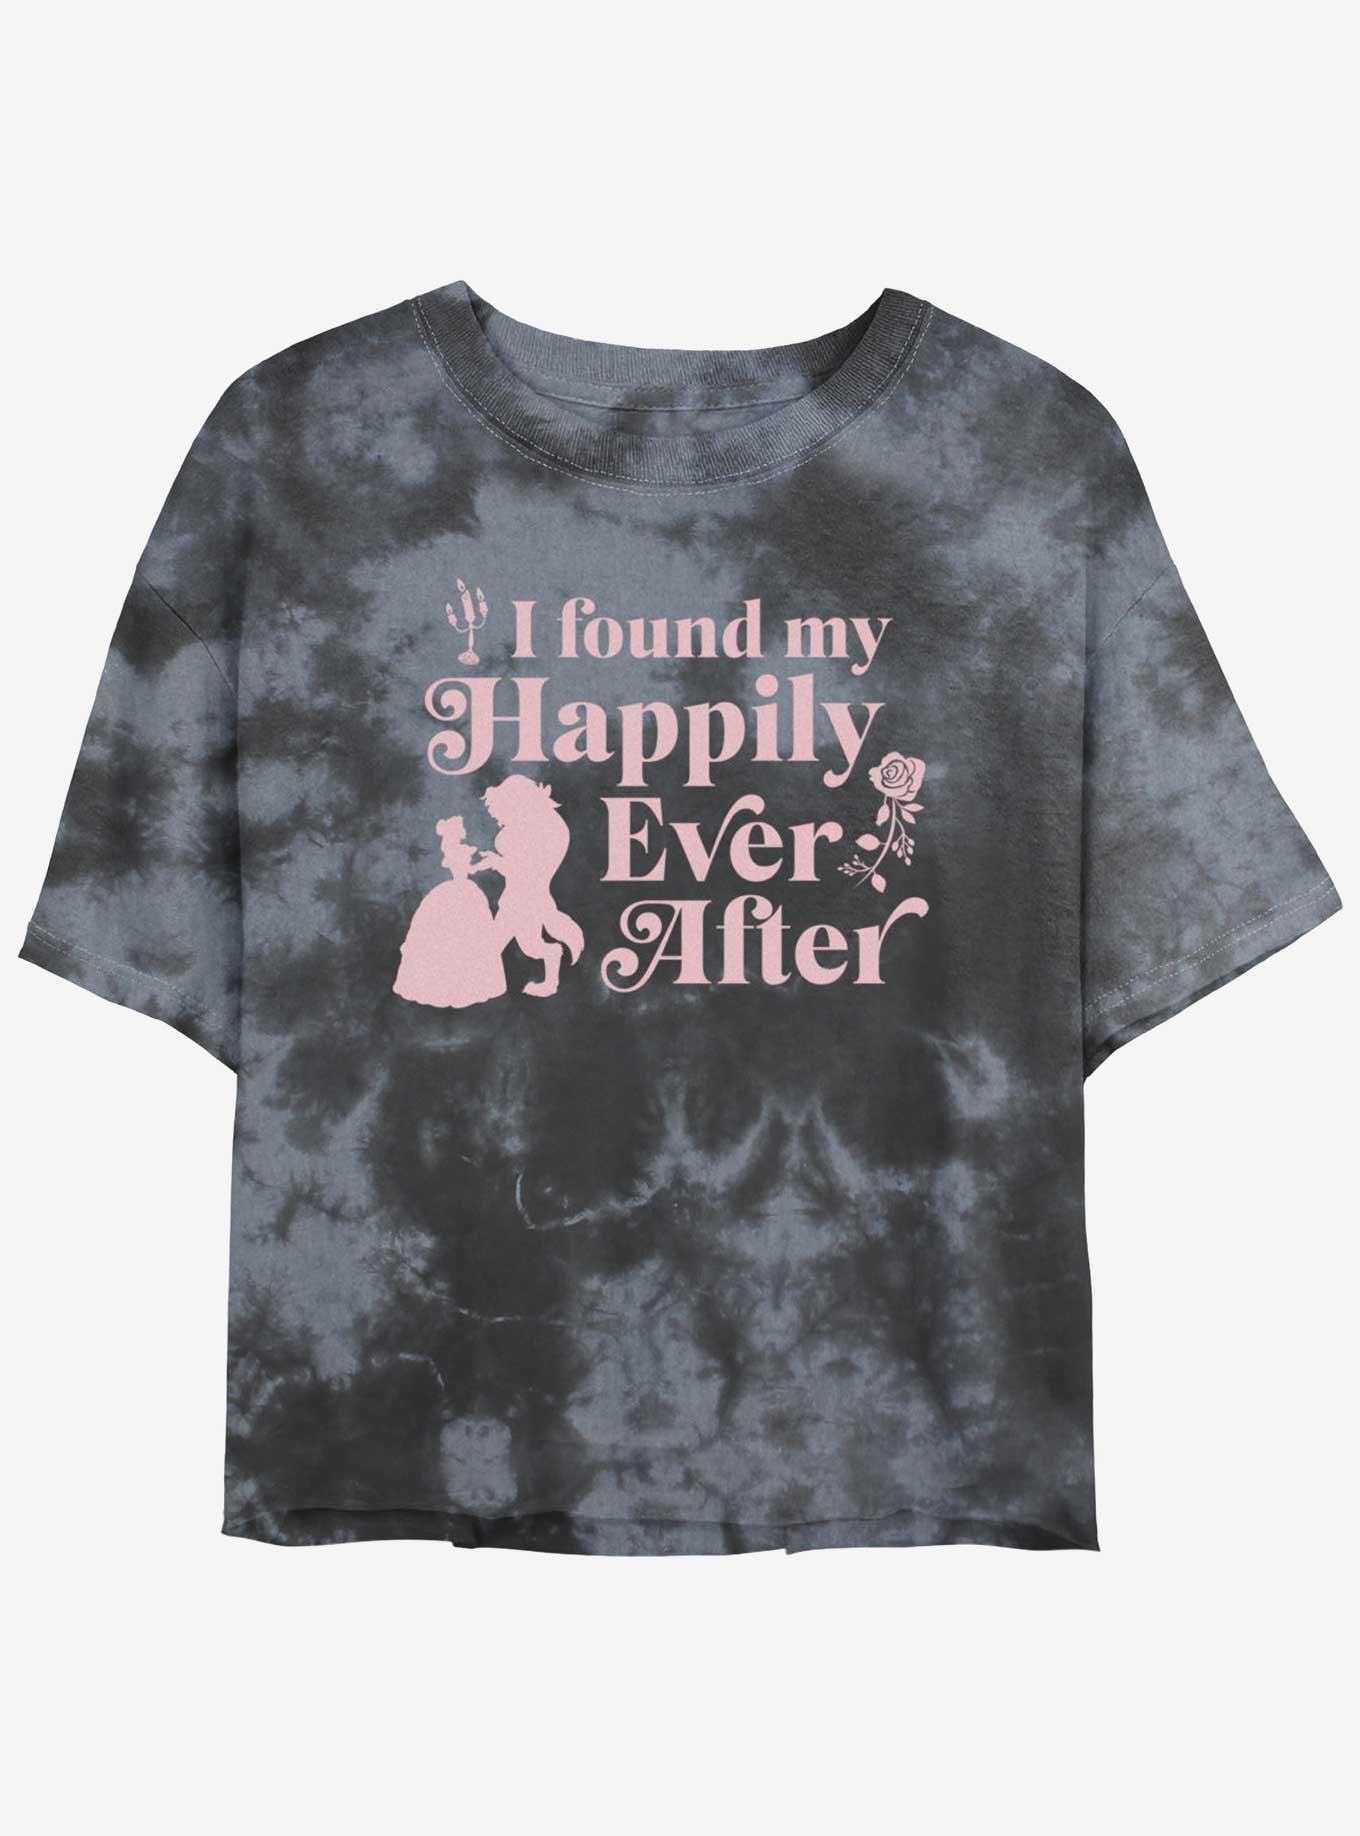 Disney Beauty and the Beast Found My Happily Ever After Girls Tie-Dye Crop T-Shirt, BLKCHAR, hi-res